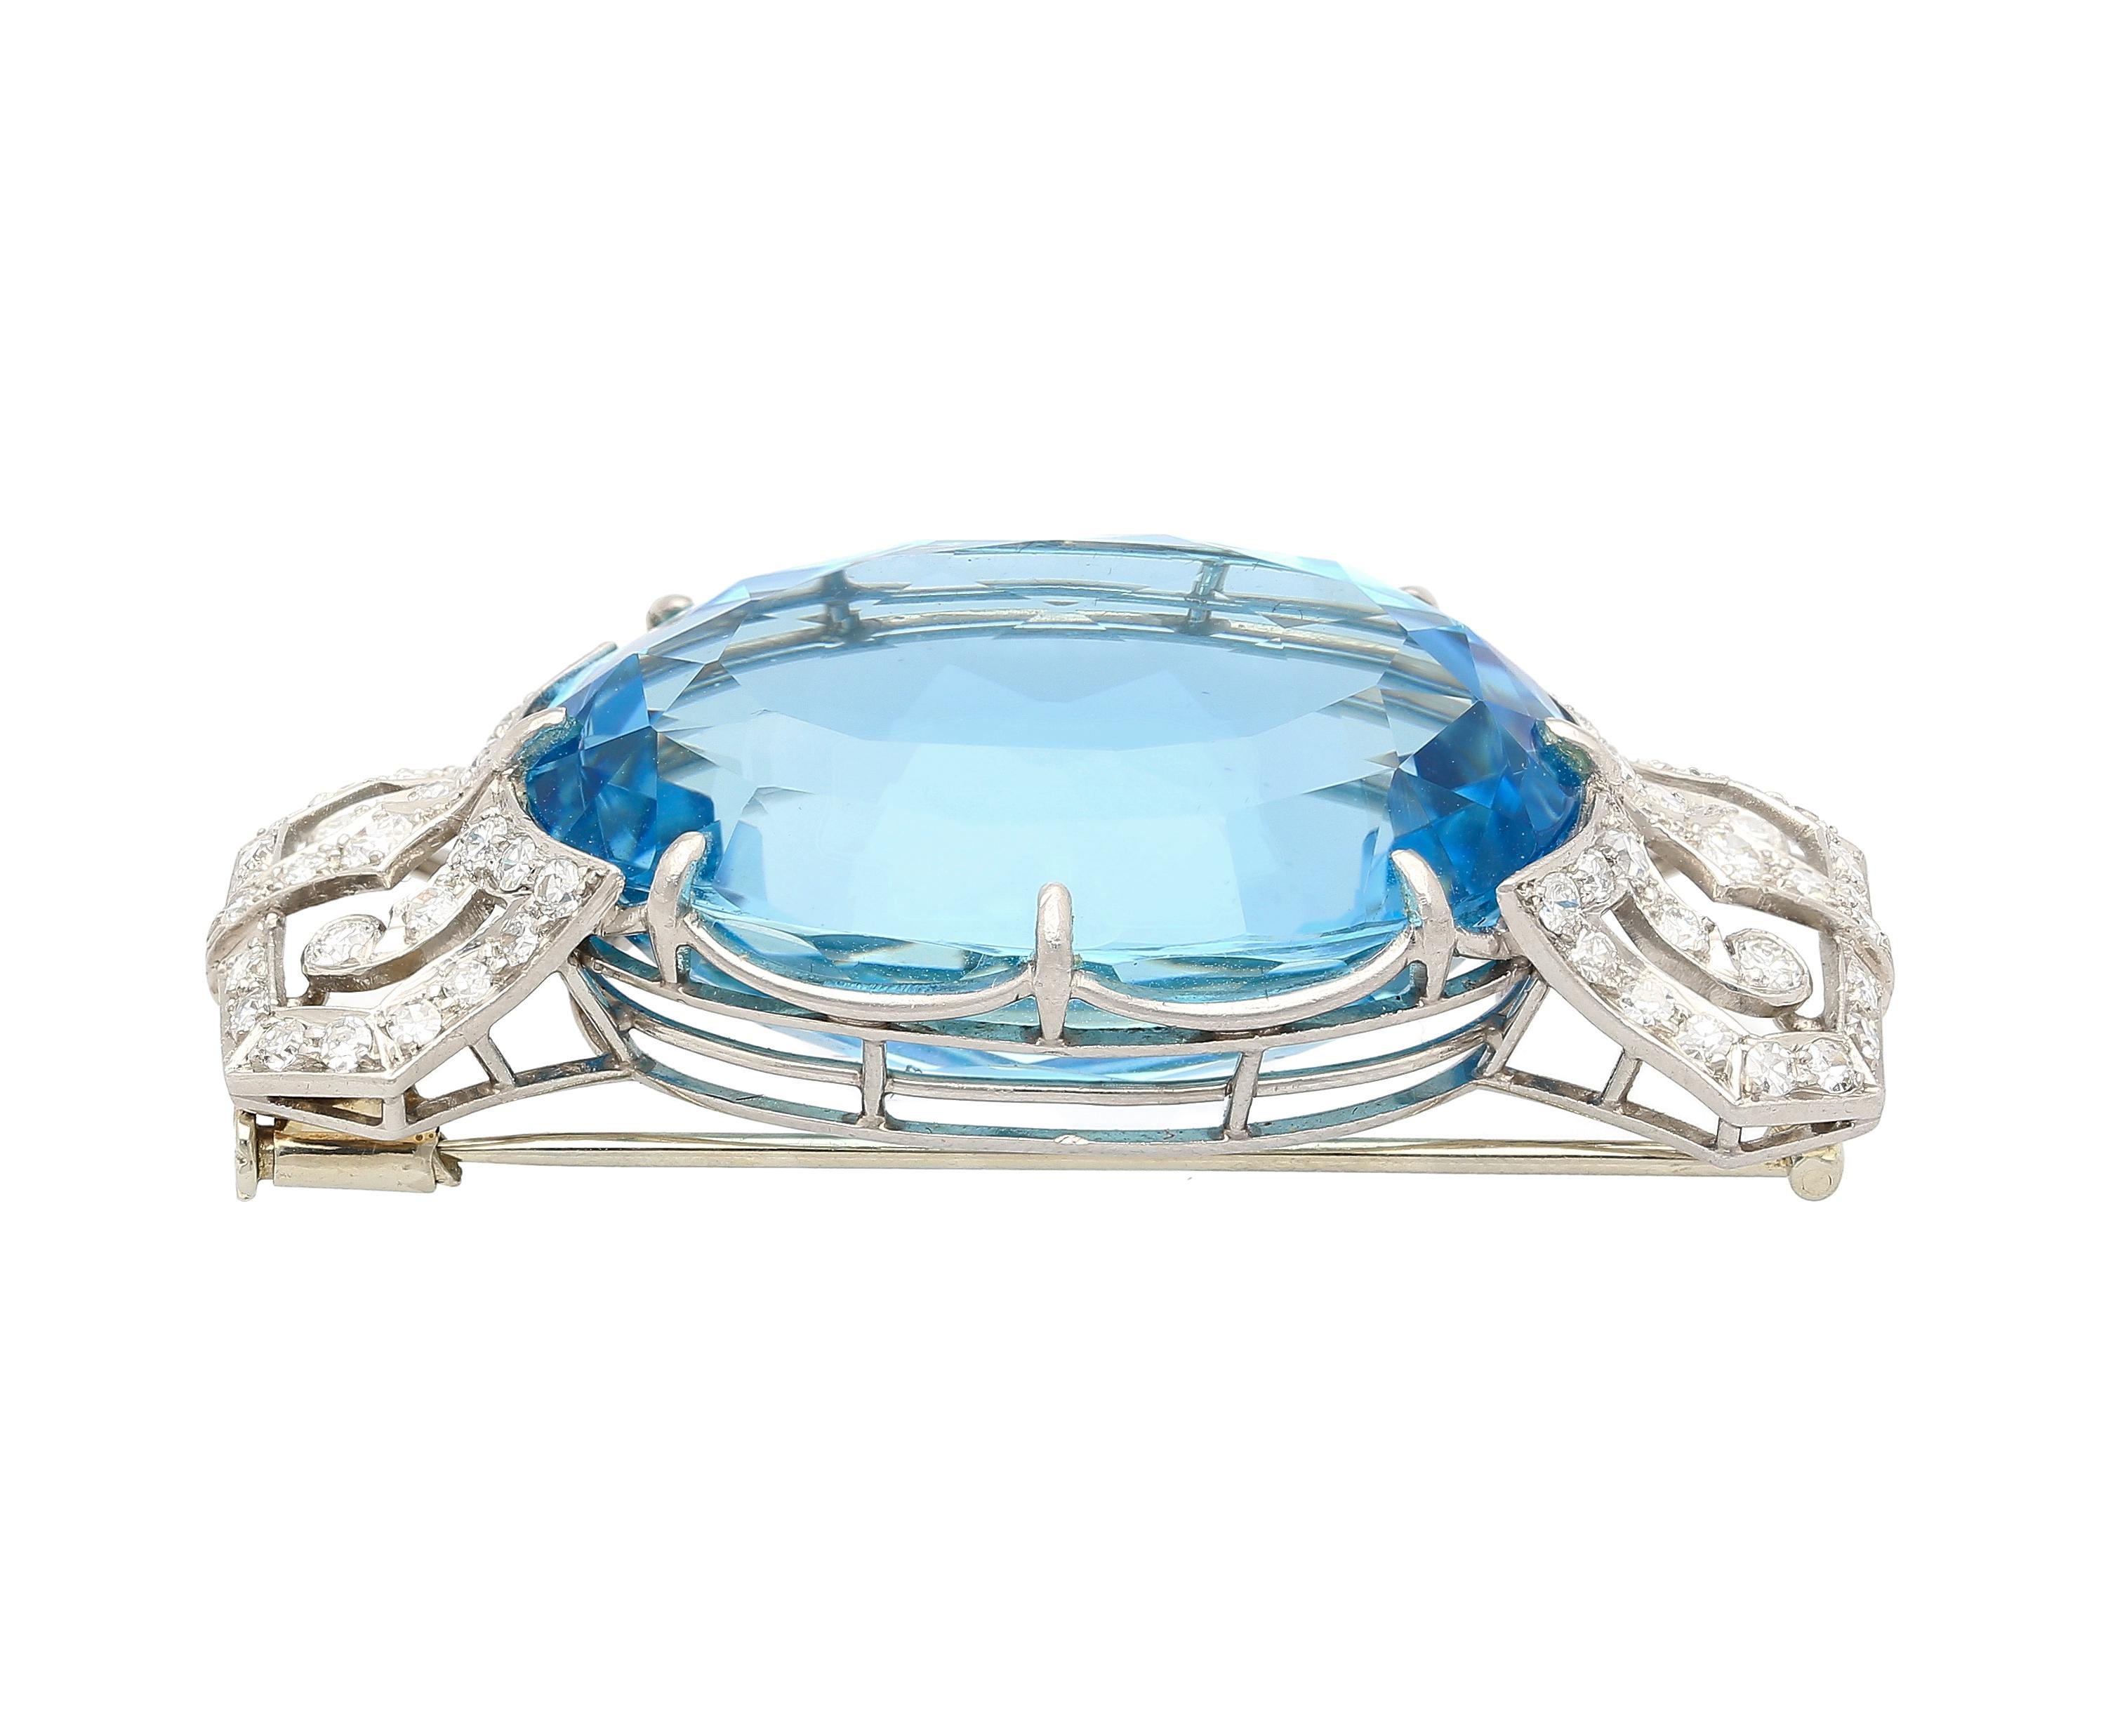 Behold the magnificence of a vintage 62-carat aquamarine brooch, adorned with dazzling diamonds and set meticulously in platinum. This exquisite piece, hailing from the Art Deco to Retro era, embodies timeless elegance and opulence. The captivating